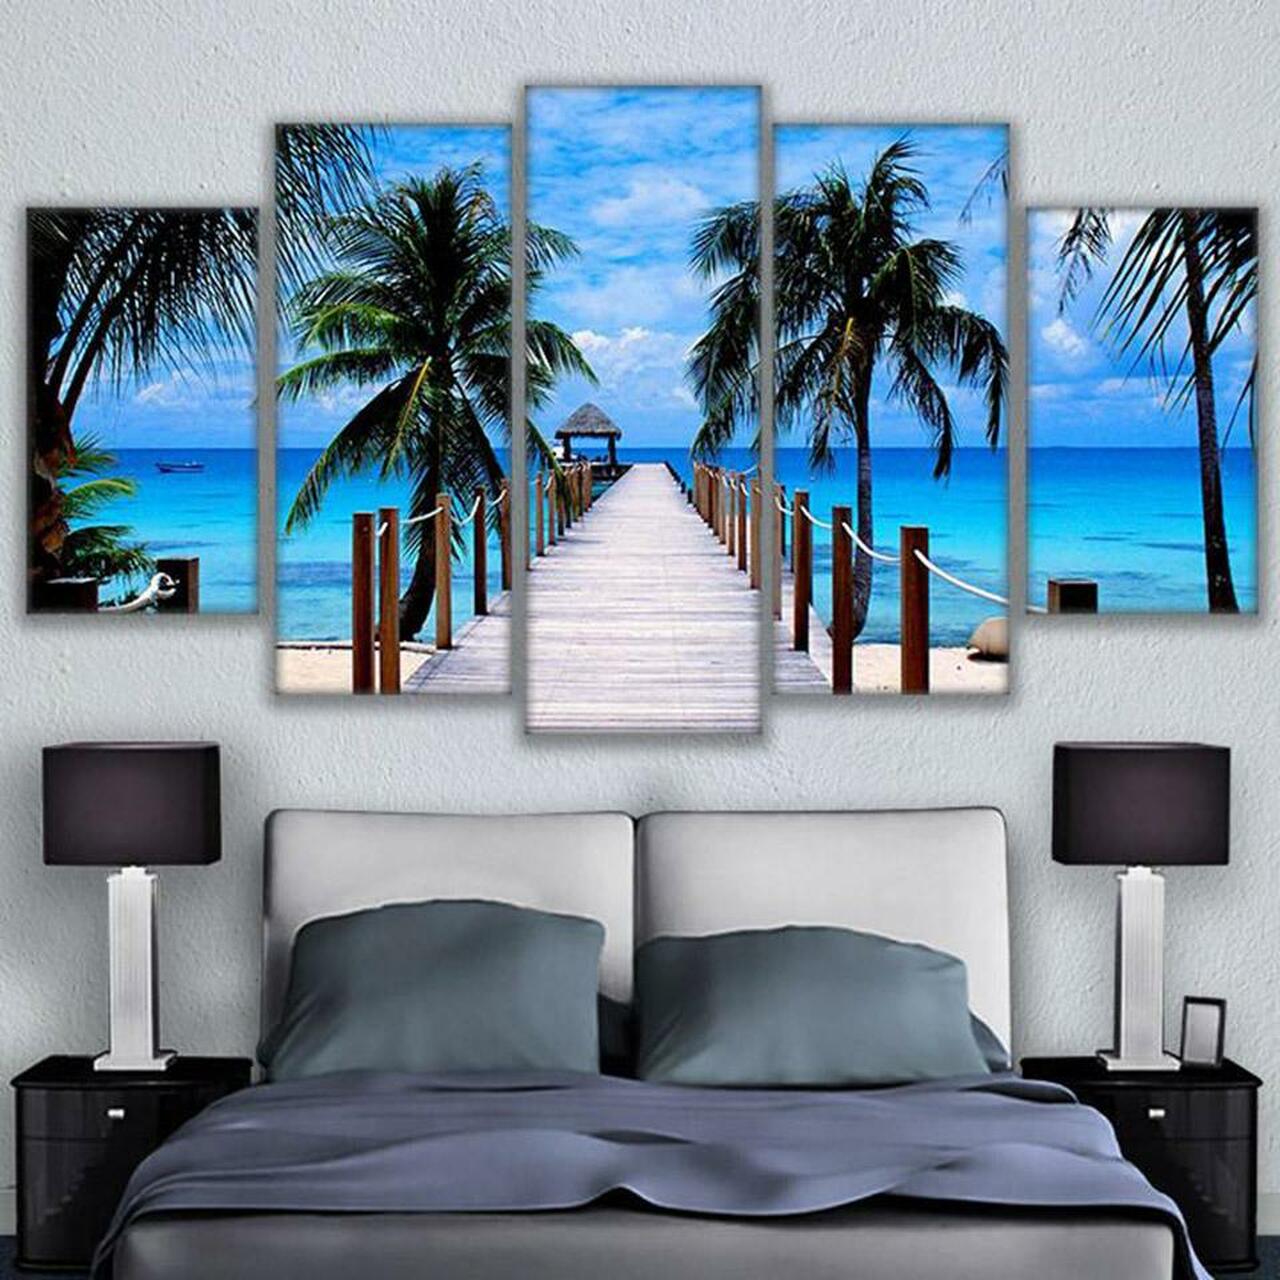 Pathway To Paradise 5 Piece Canvas Art Wall Decor